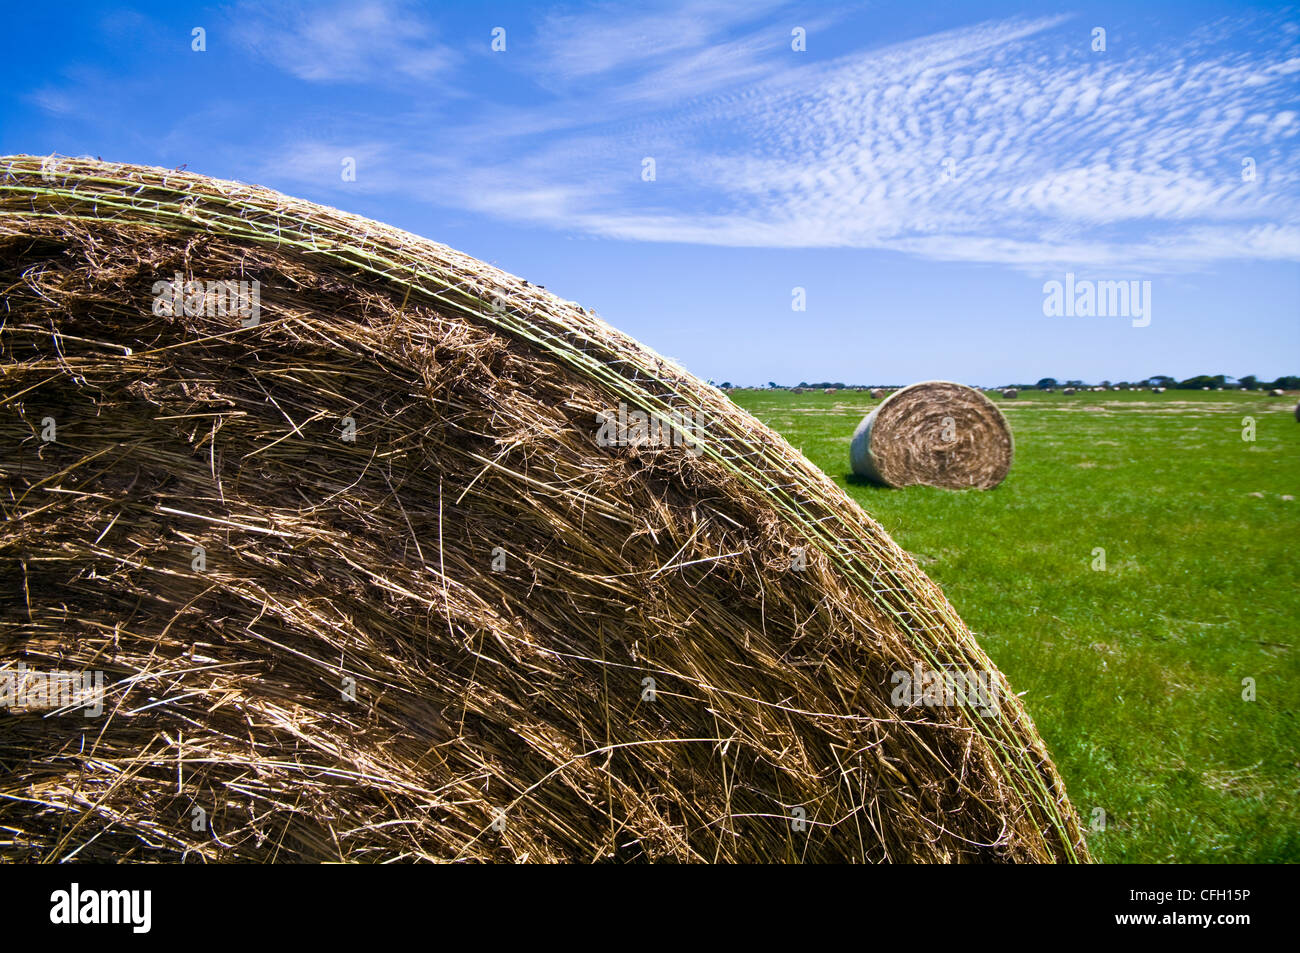 After harvesting round hay bails lie scattered in a lush farm field. Stock Photo